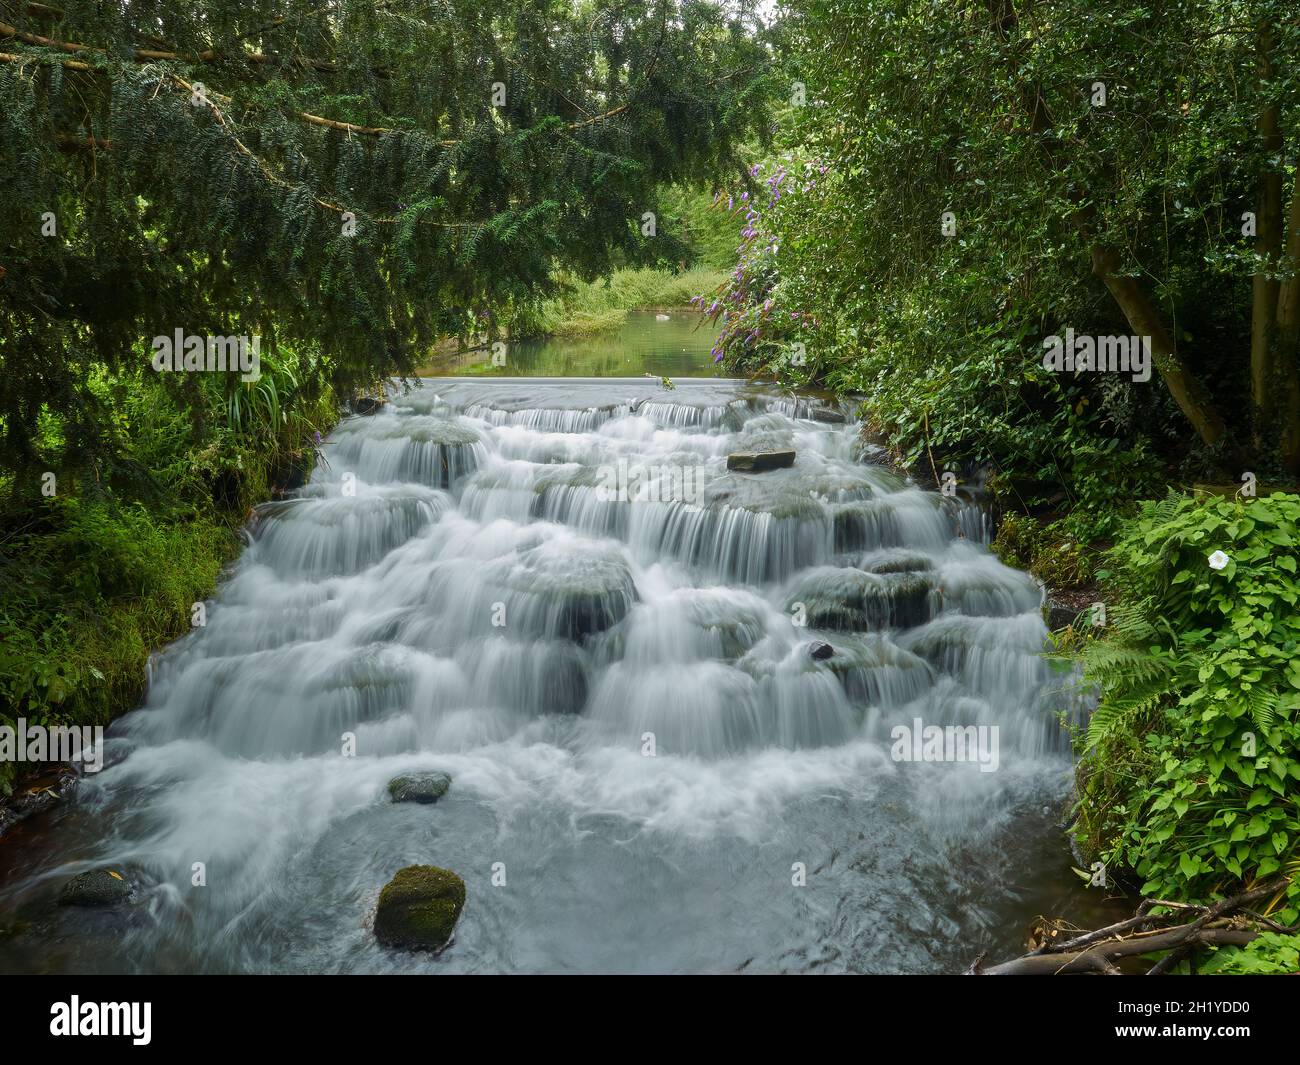 A small, tree surrounded, multi-tiered waterfall in a suburban park, taken using a slow shutter to captured the susurration of the falling water. Stock Photo